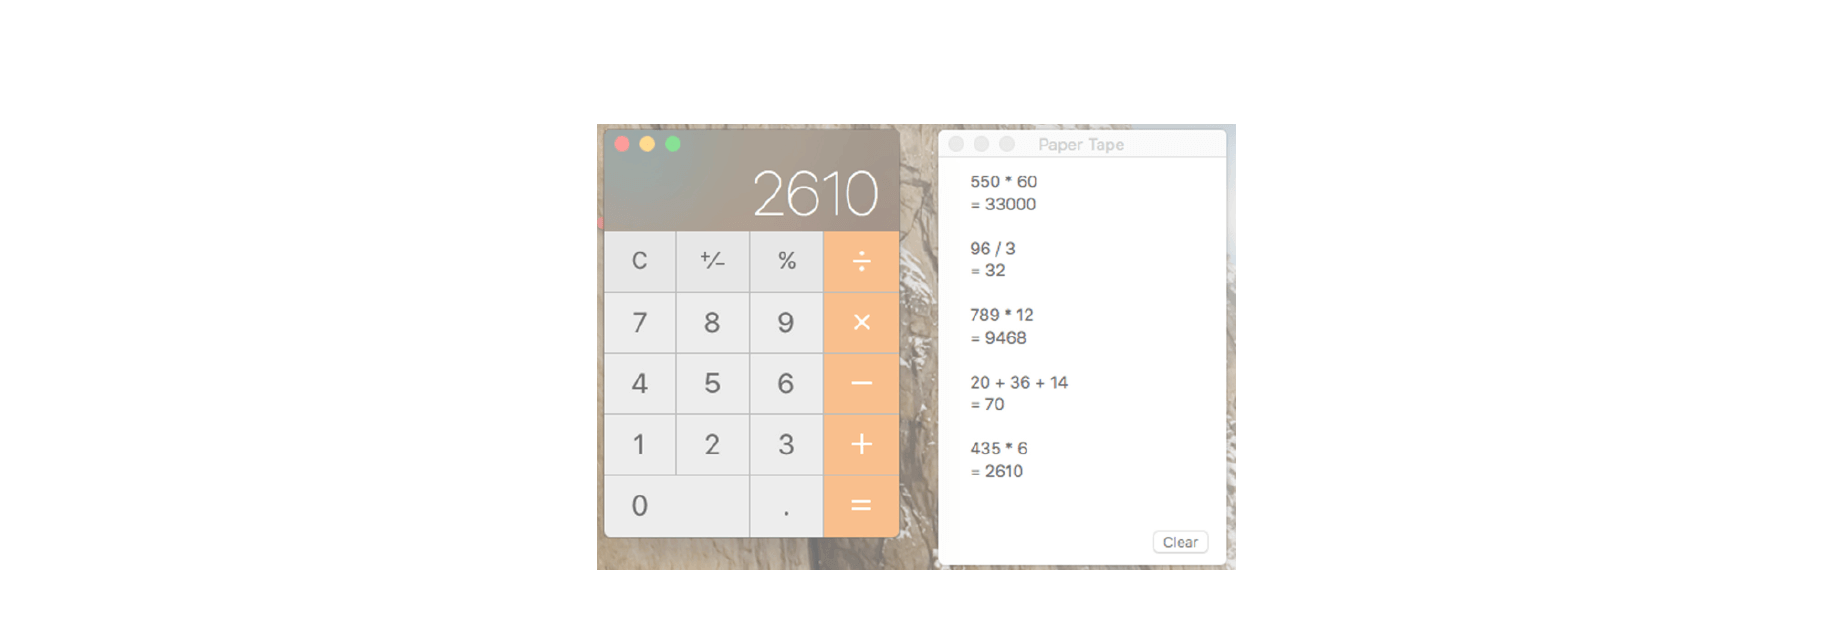 How to show a paper tape for the Mac  Calculator app